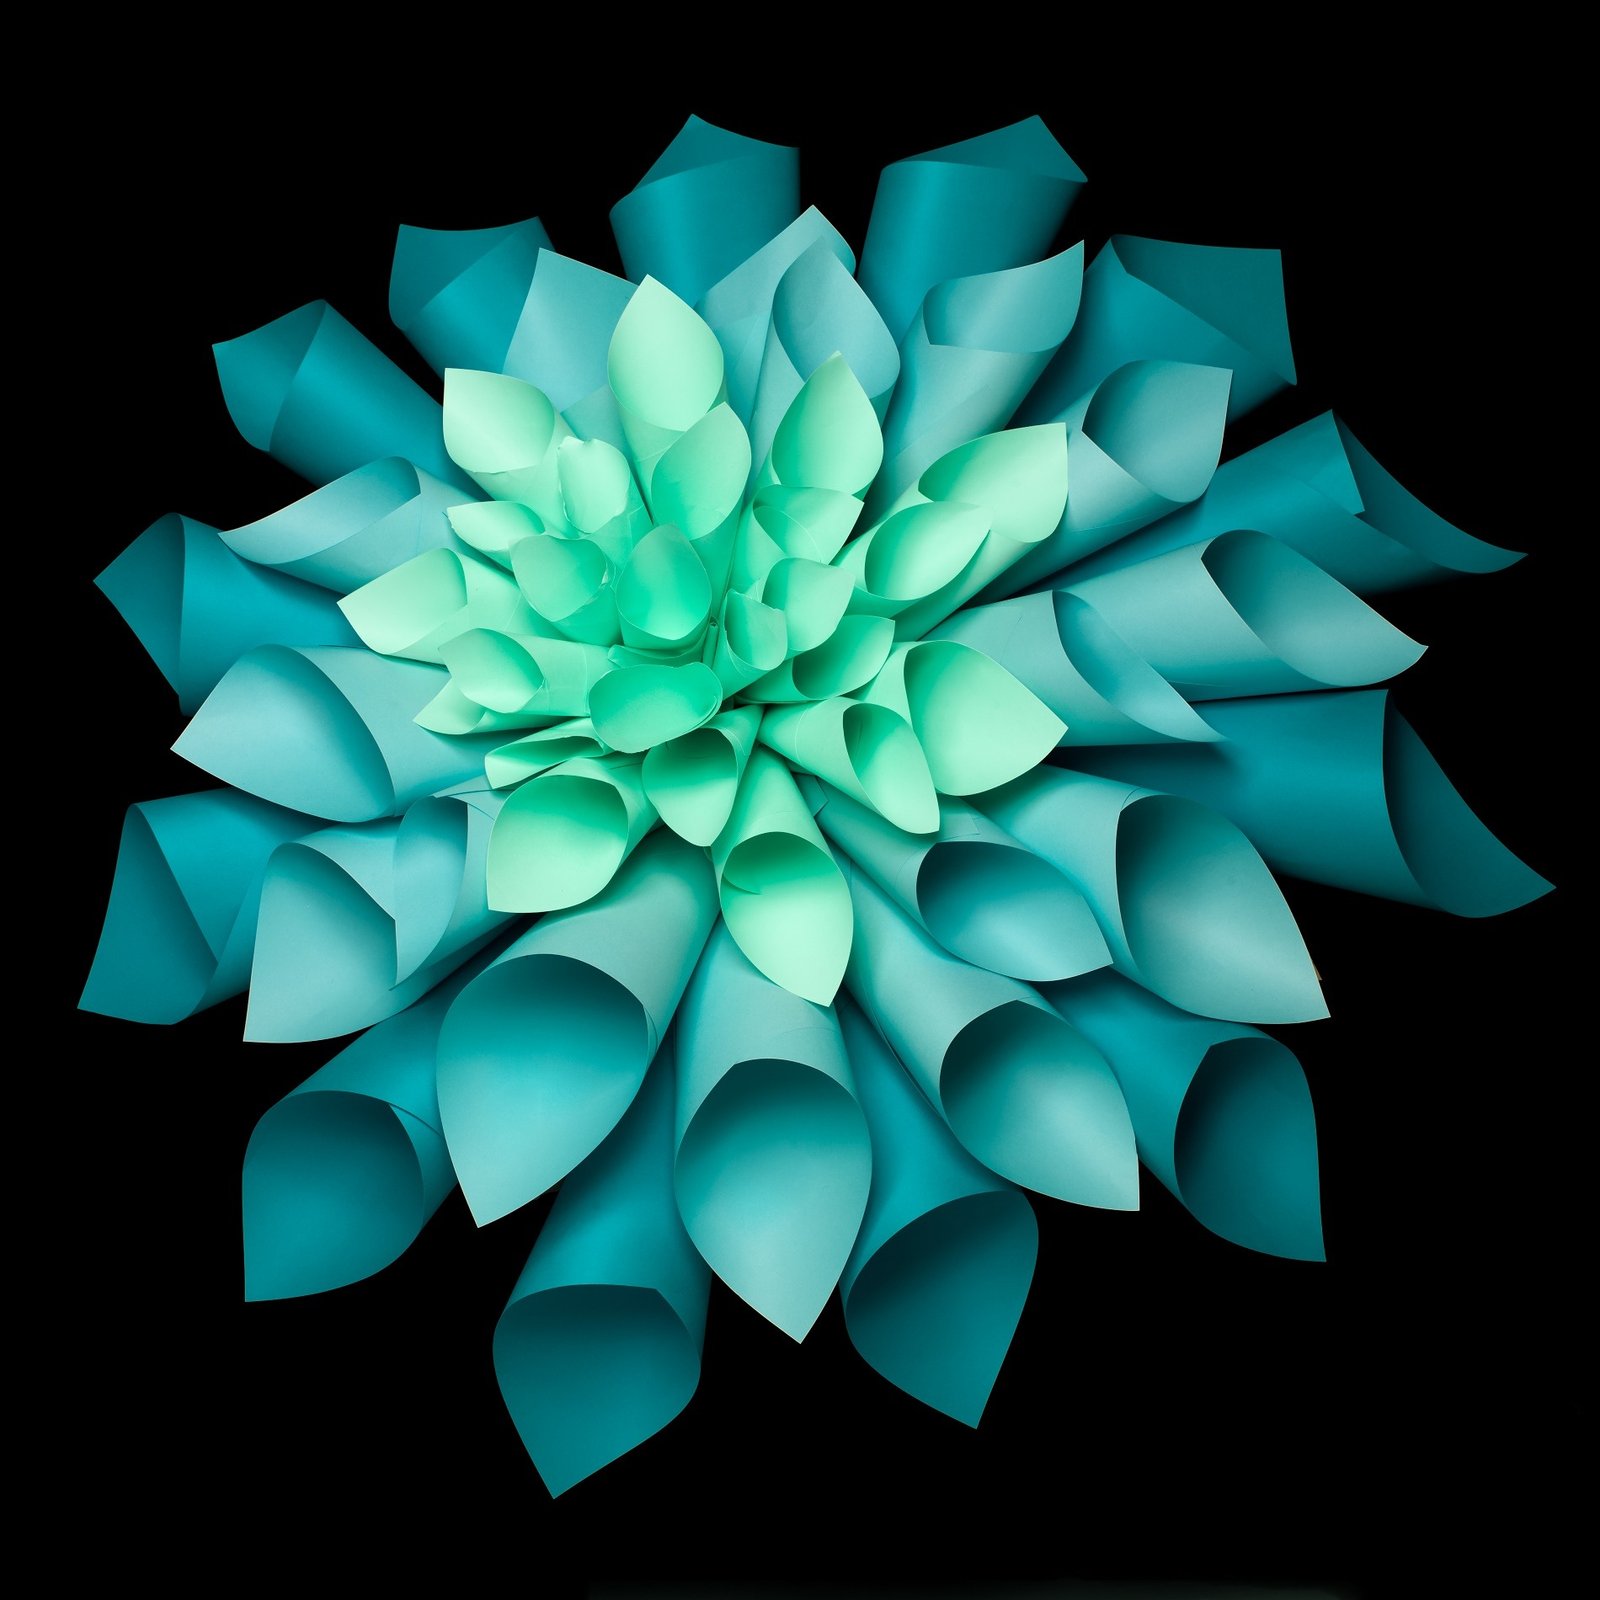 abstract image of origami flower shape made out of rolled sheets of paper on black background